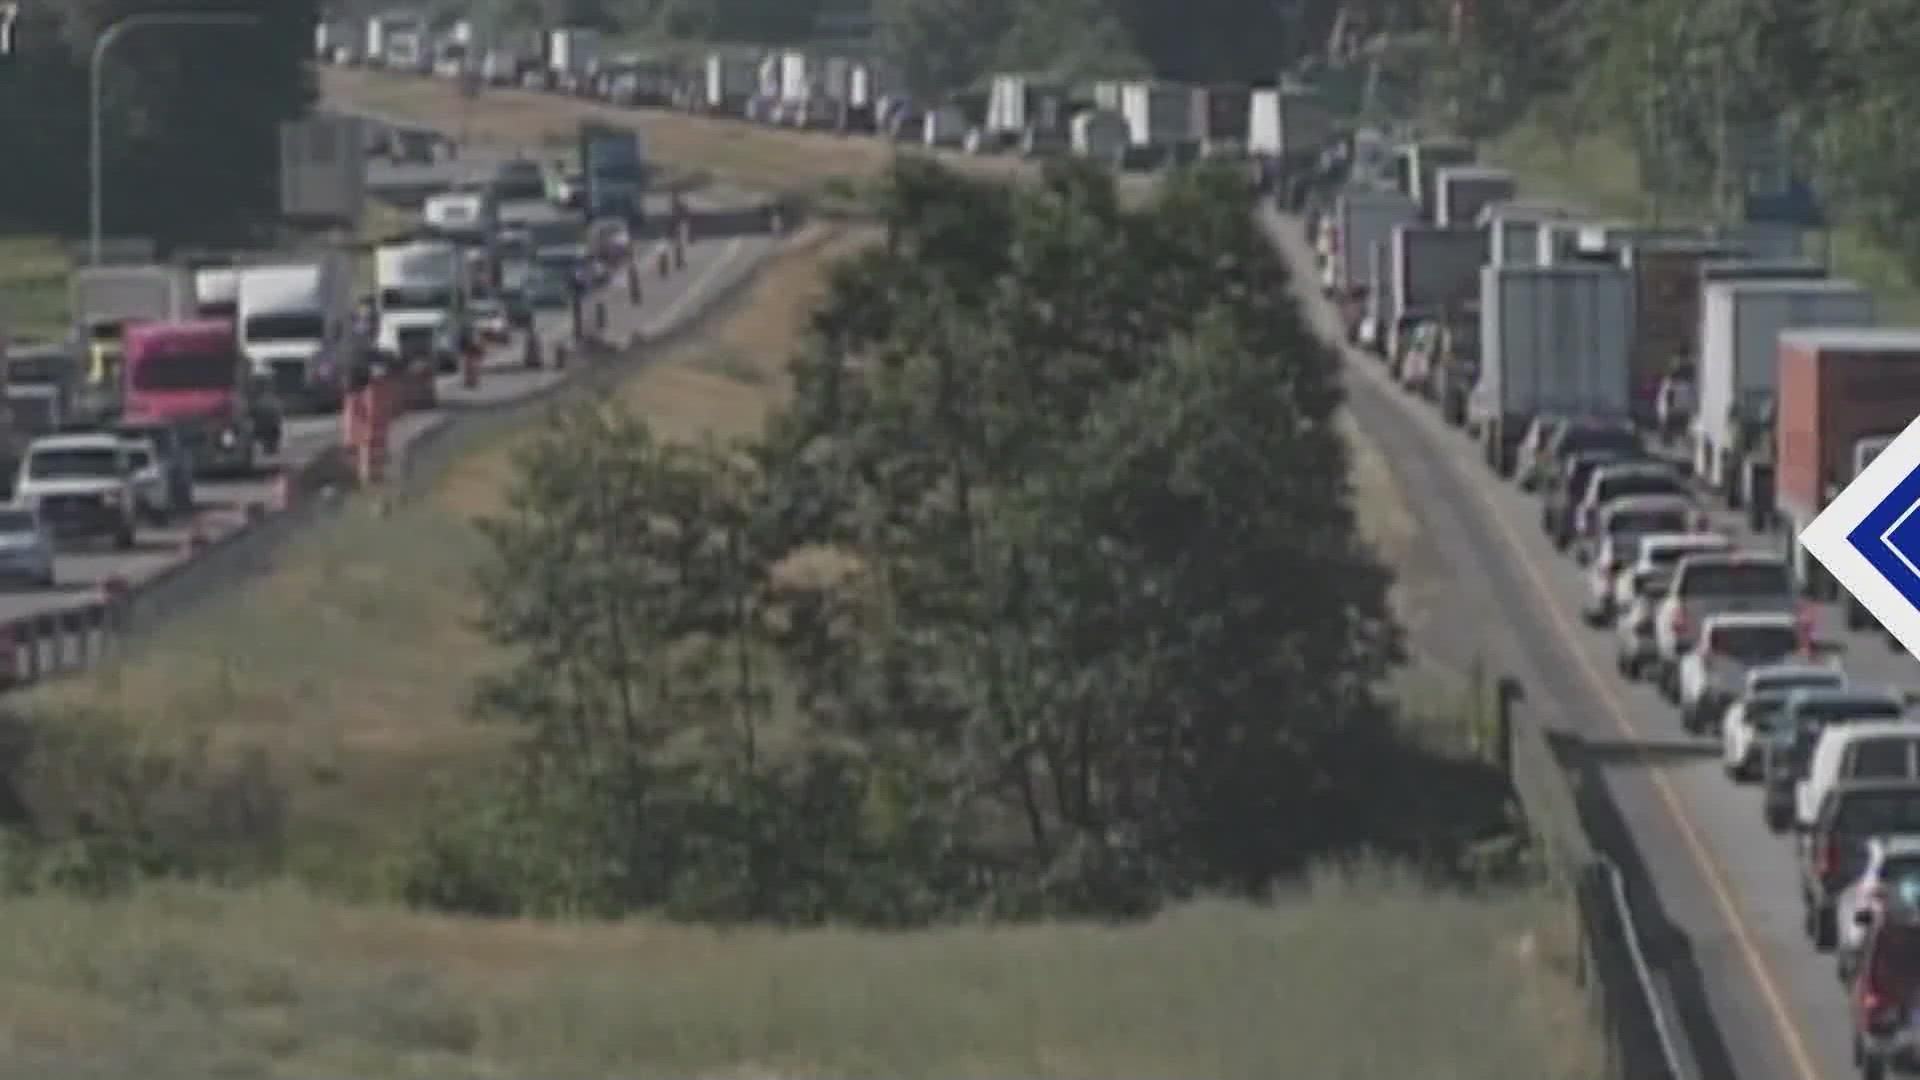 The rollover initially blocked all southbound lanes, causing a four-mile backup approaching the SR 410 interchange.